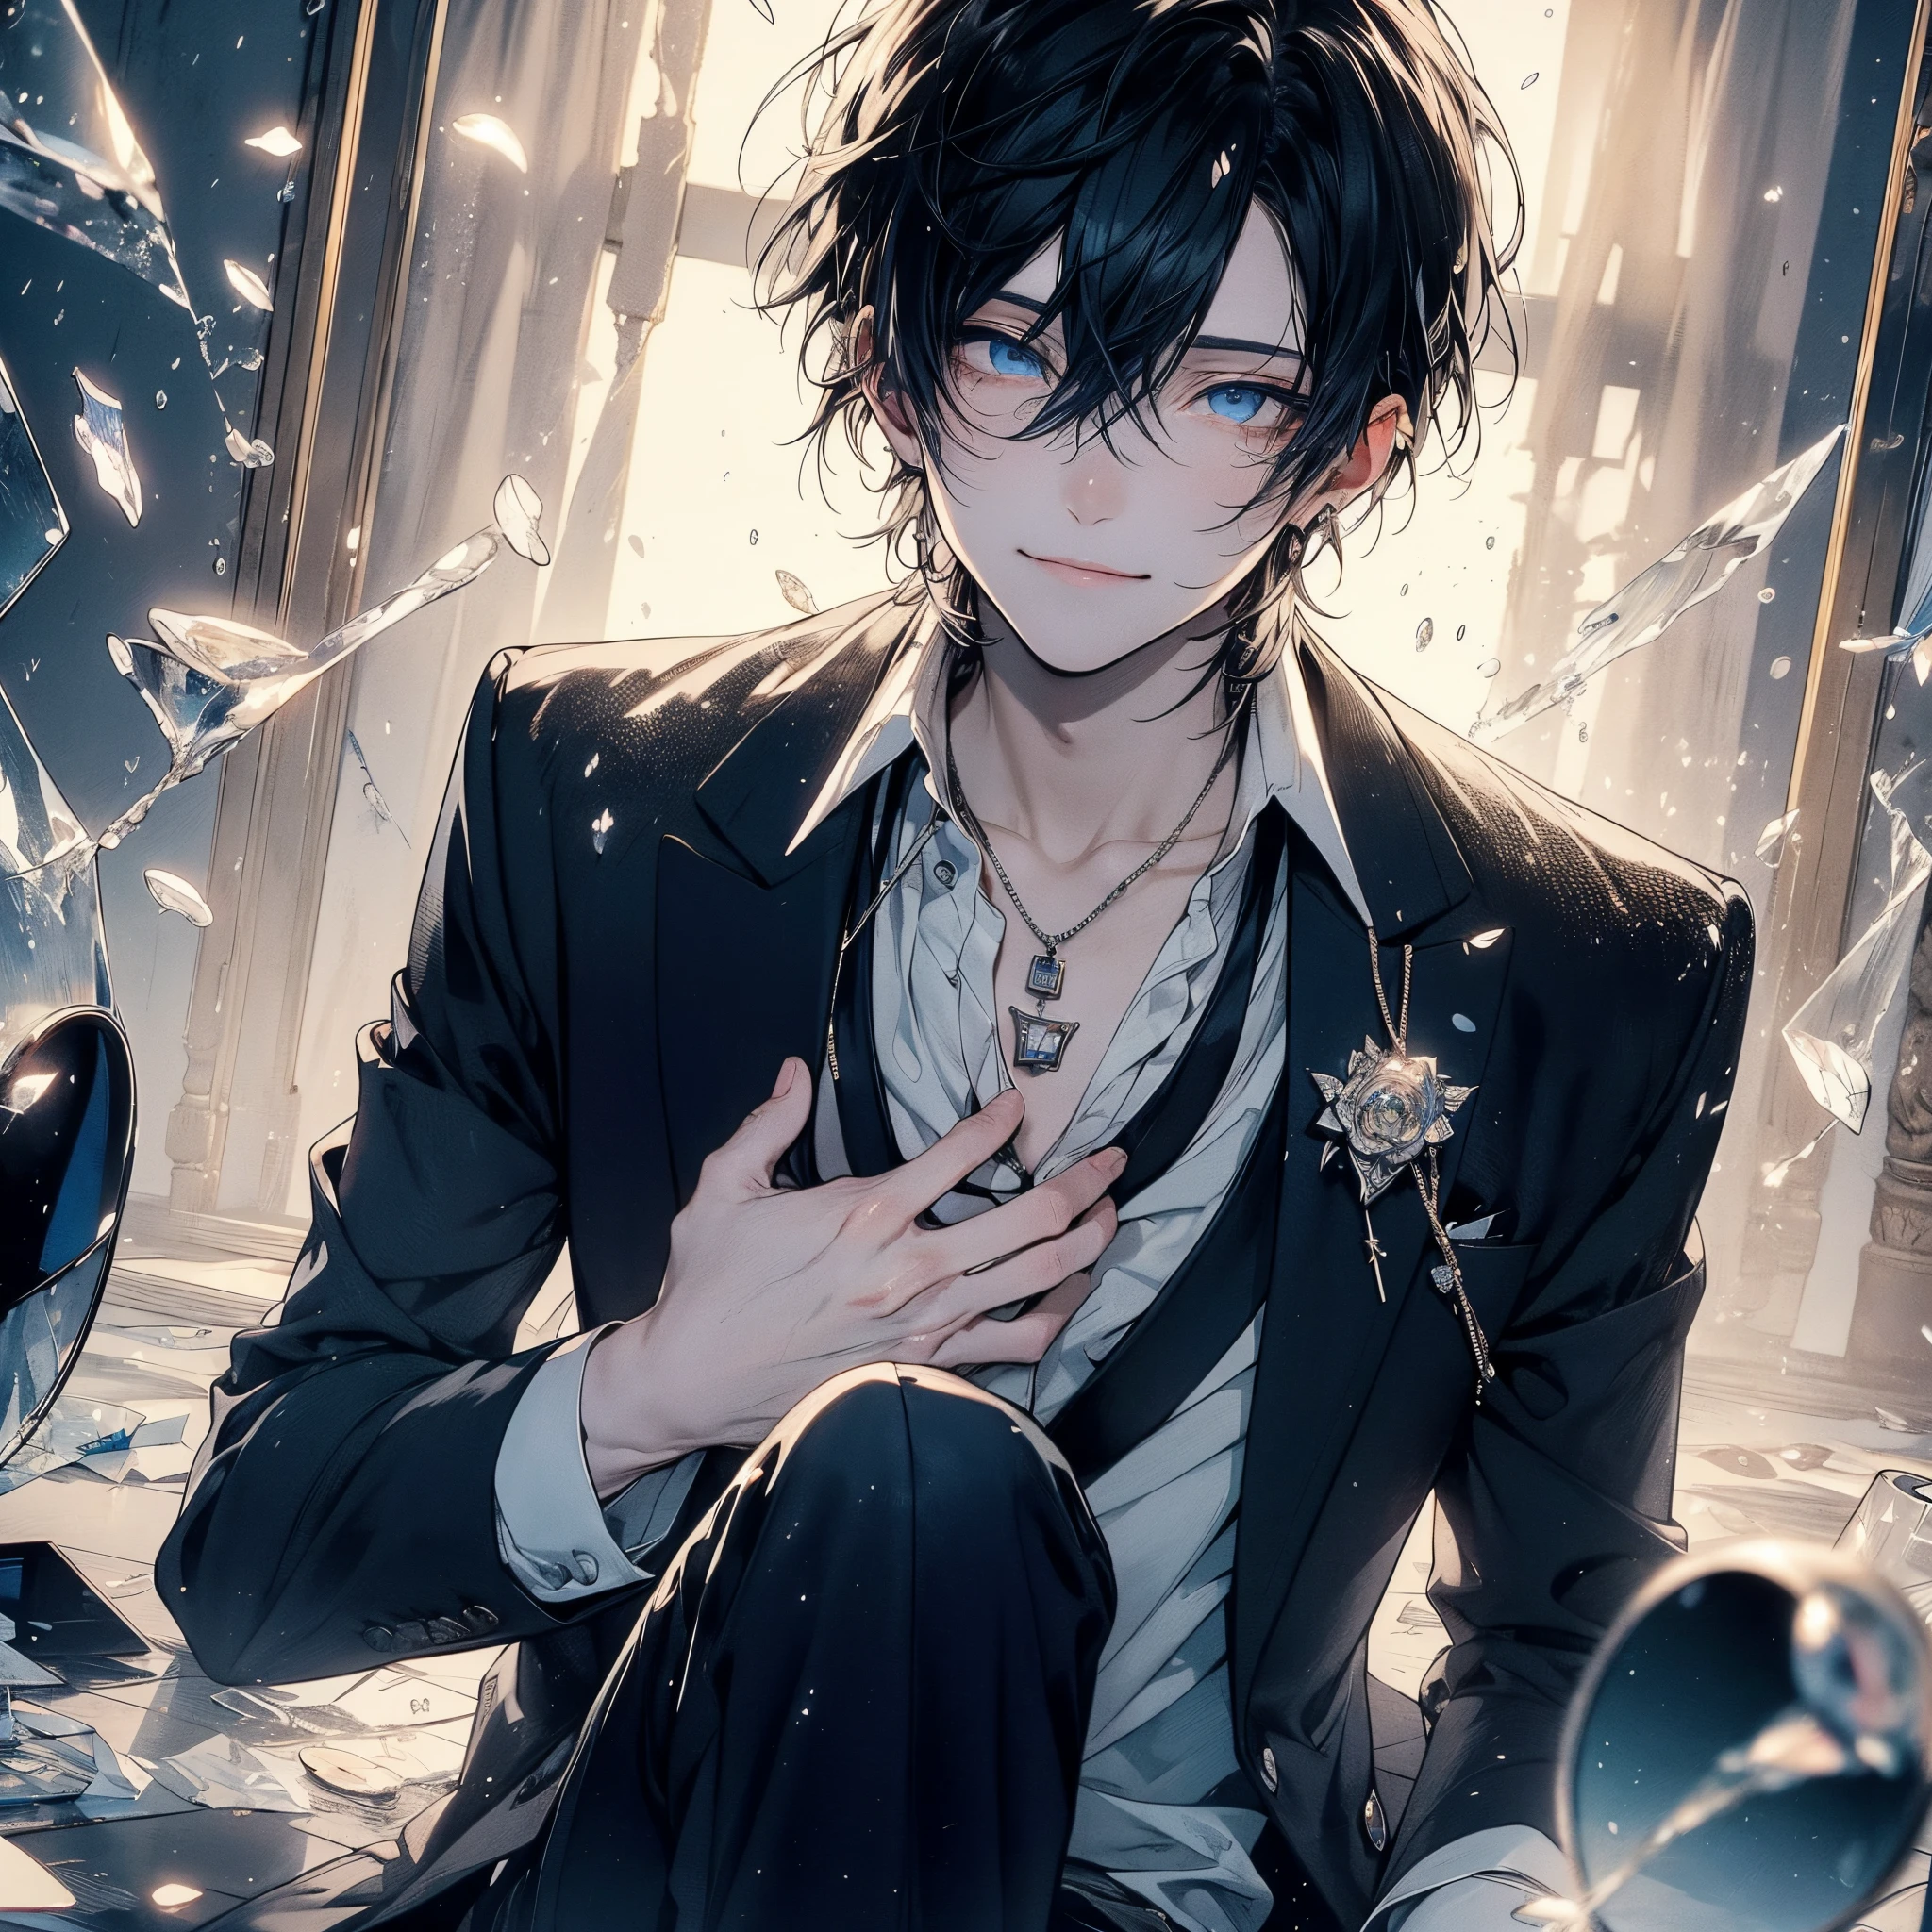 Beautiful young man, jet-black hair, Deep Blue Eyes, Elegant but disheveled formal attire, Sitting on the floor, Hug your knees, Smile even though you shed tears, sparkling broken heart pendant, powder々A dim room with a shattered mirror, An overhead view of scattered petals, Tears like subtle raindrops and a soft glow around the character.